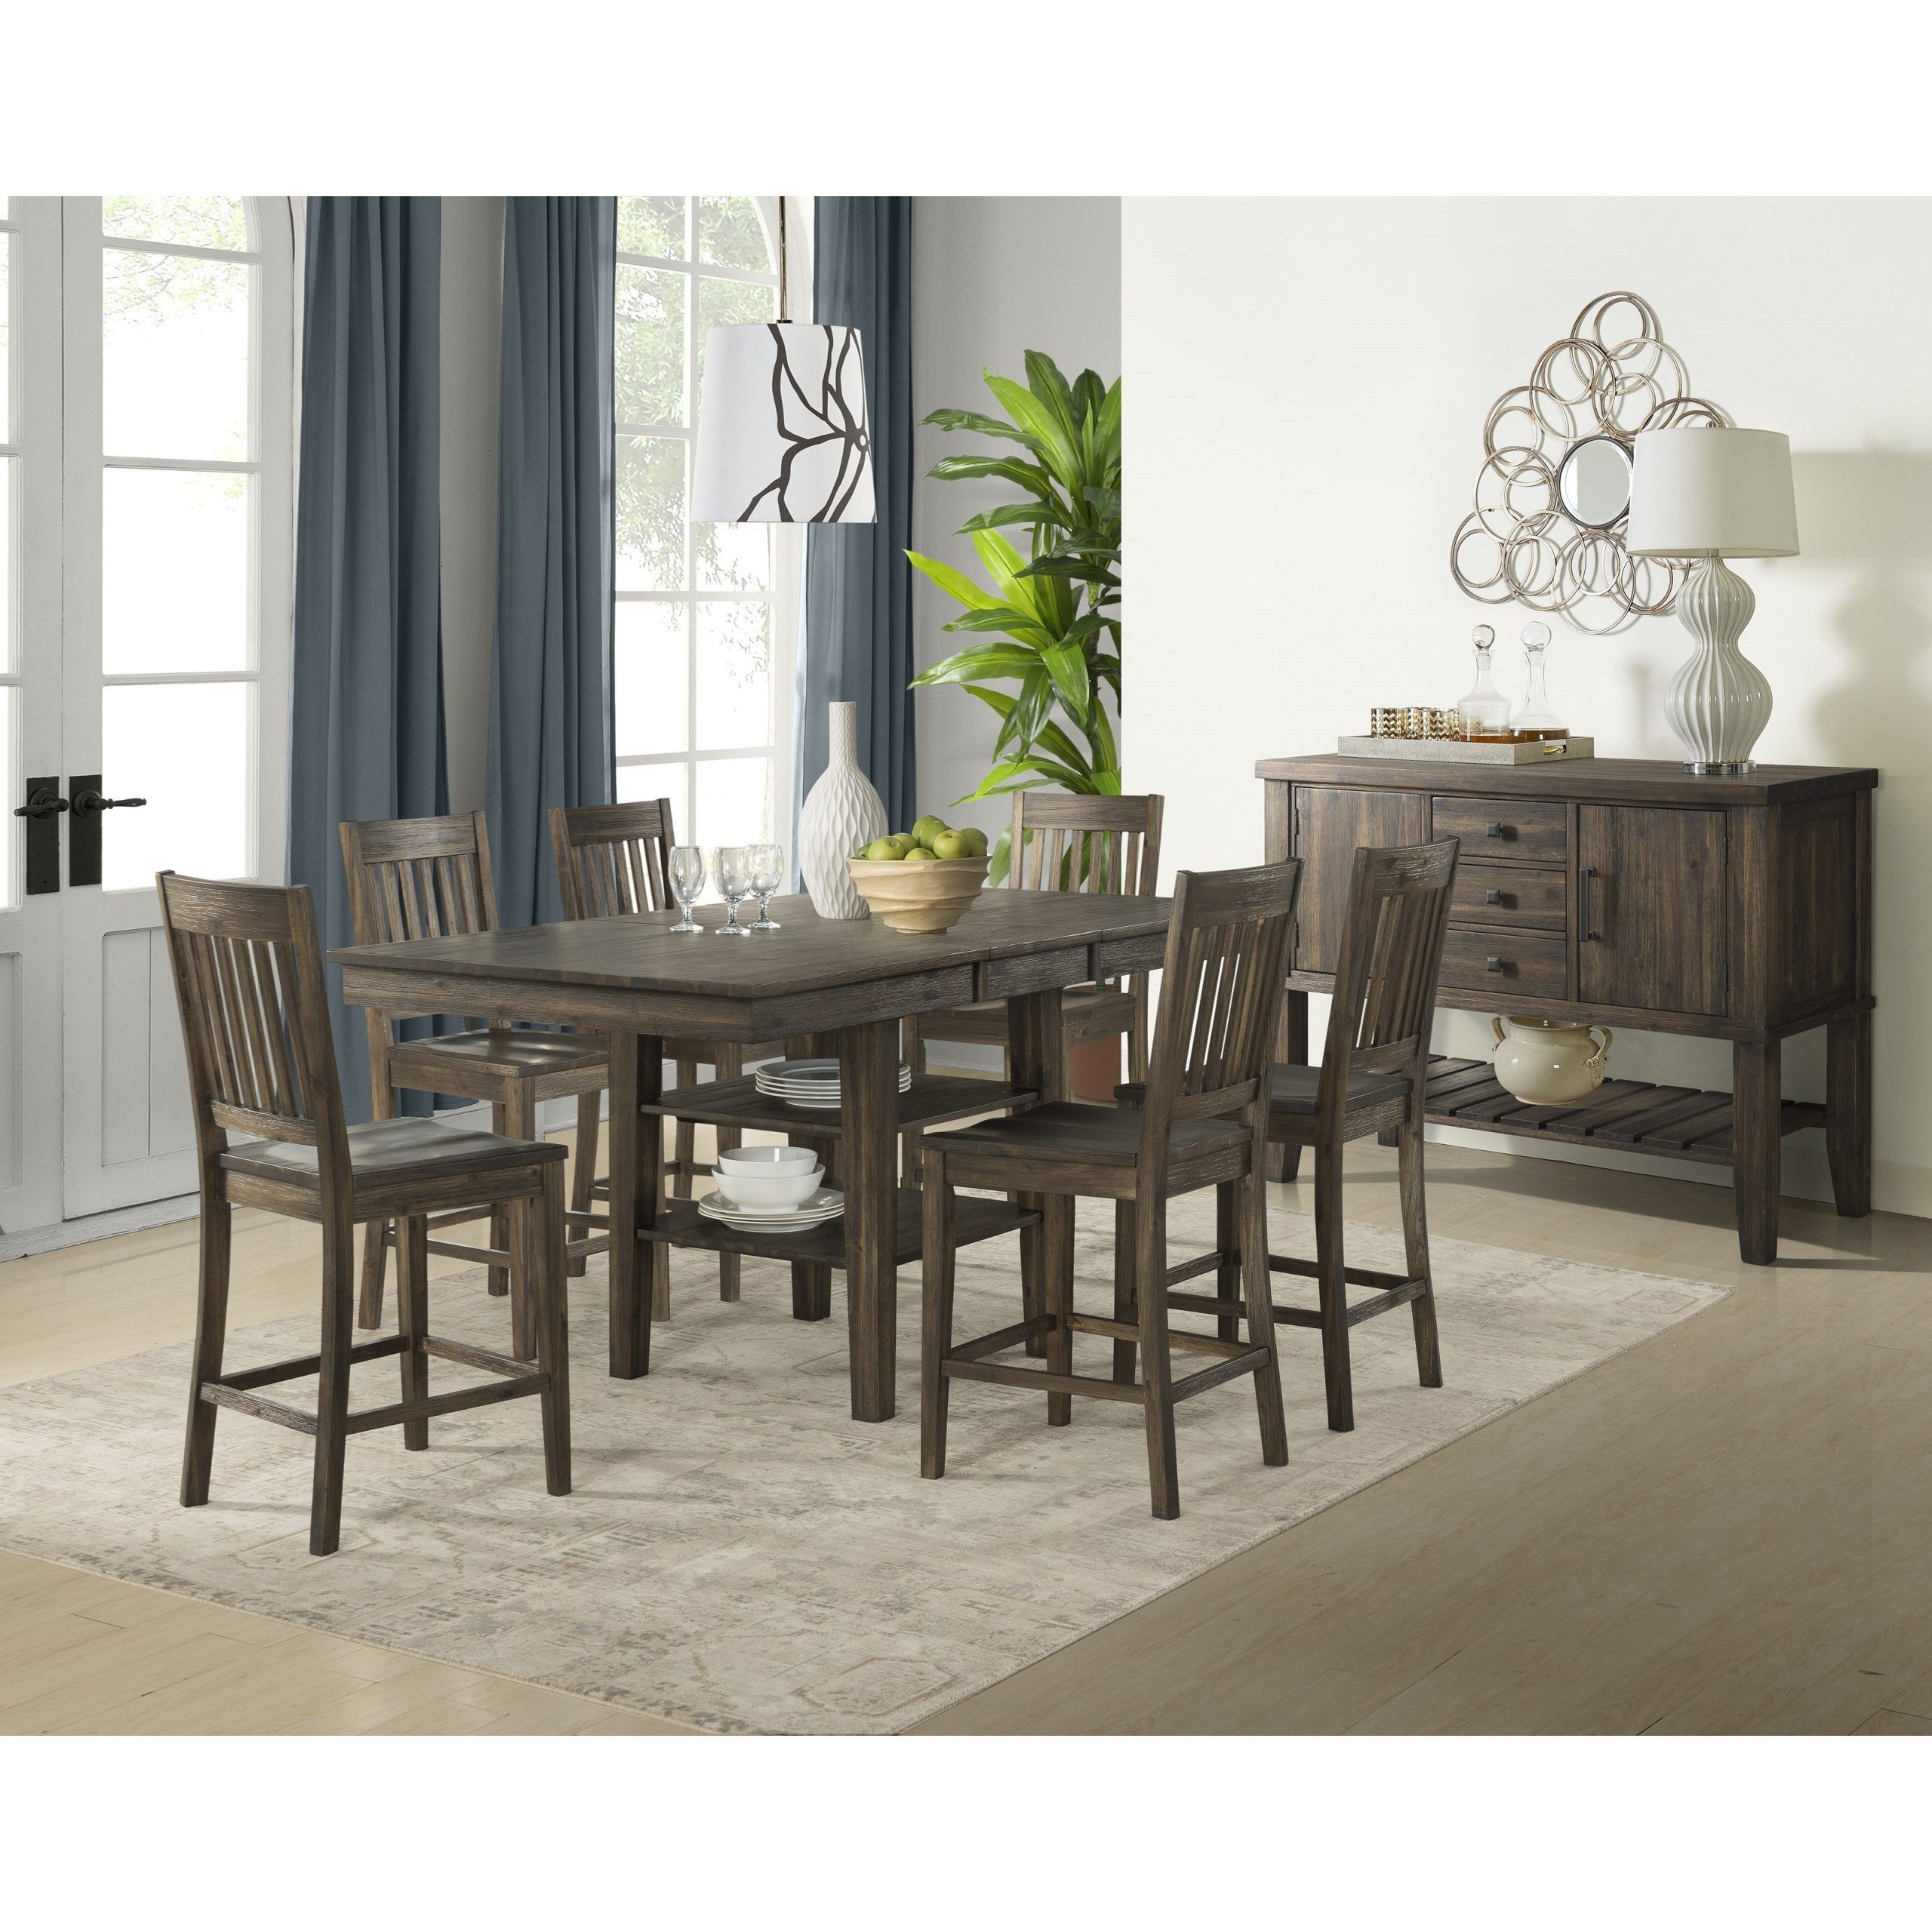 Aamerica Huron Transitional Solid Wood Counter Height Throughout Most Popular Nakano Counter Height Pedestal Dining Tables (View 13 of 20)